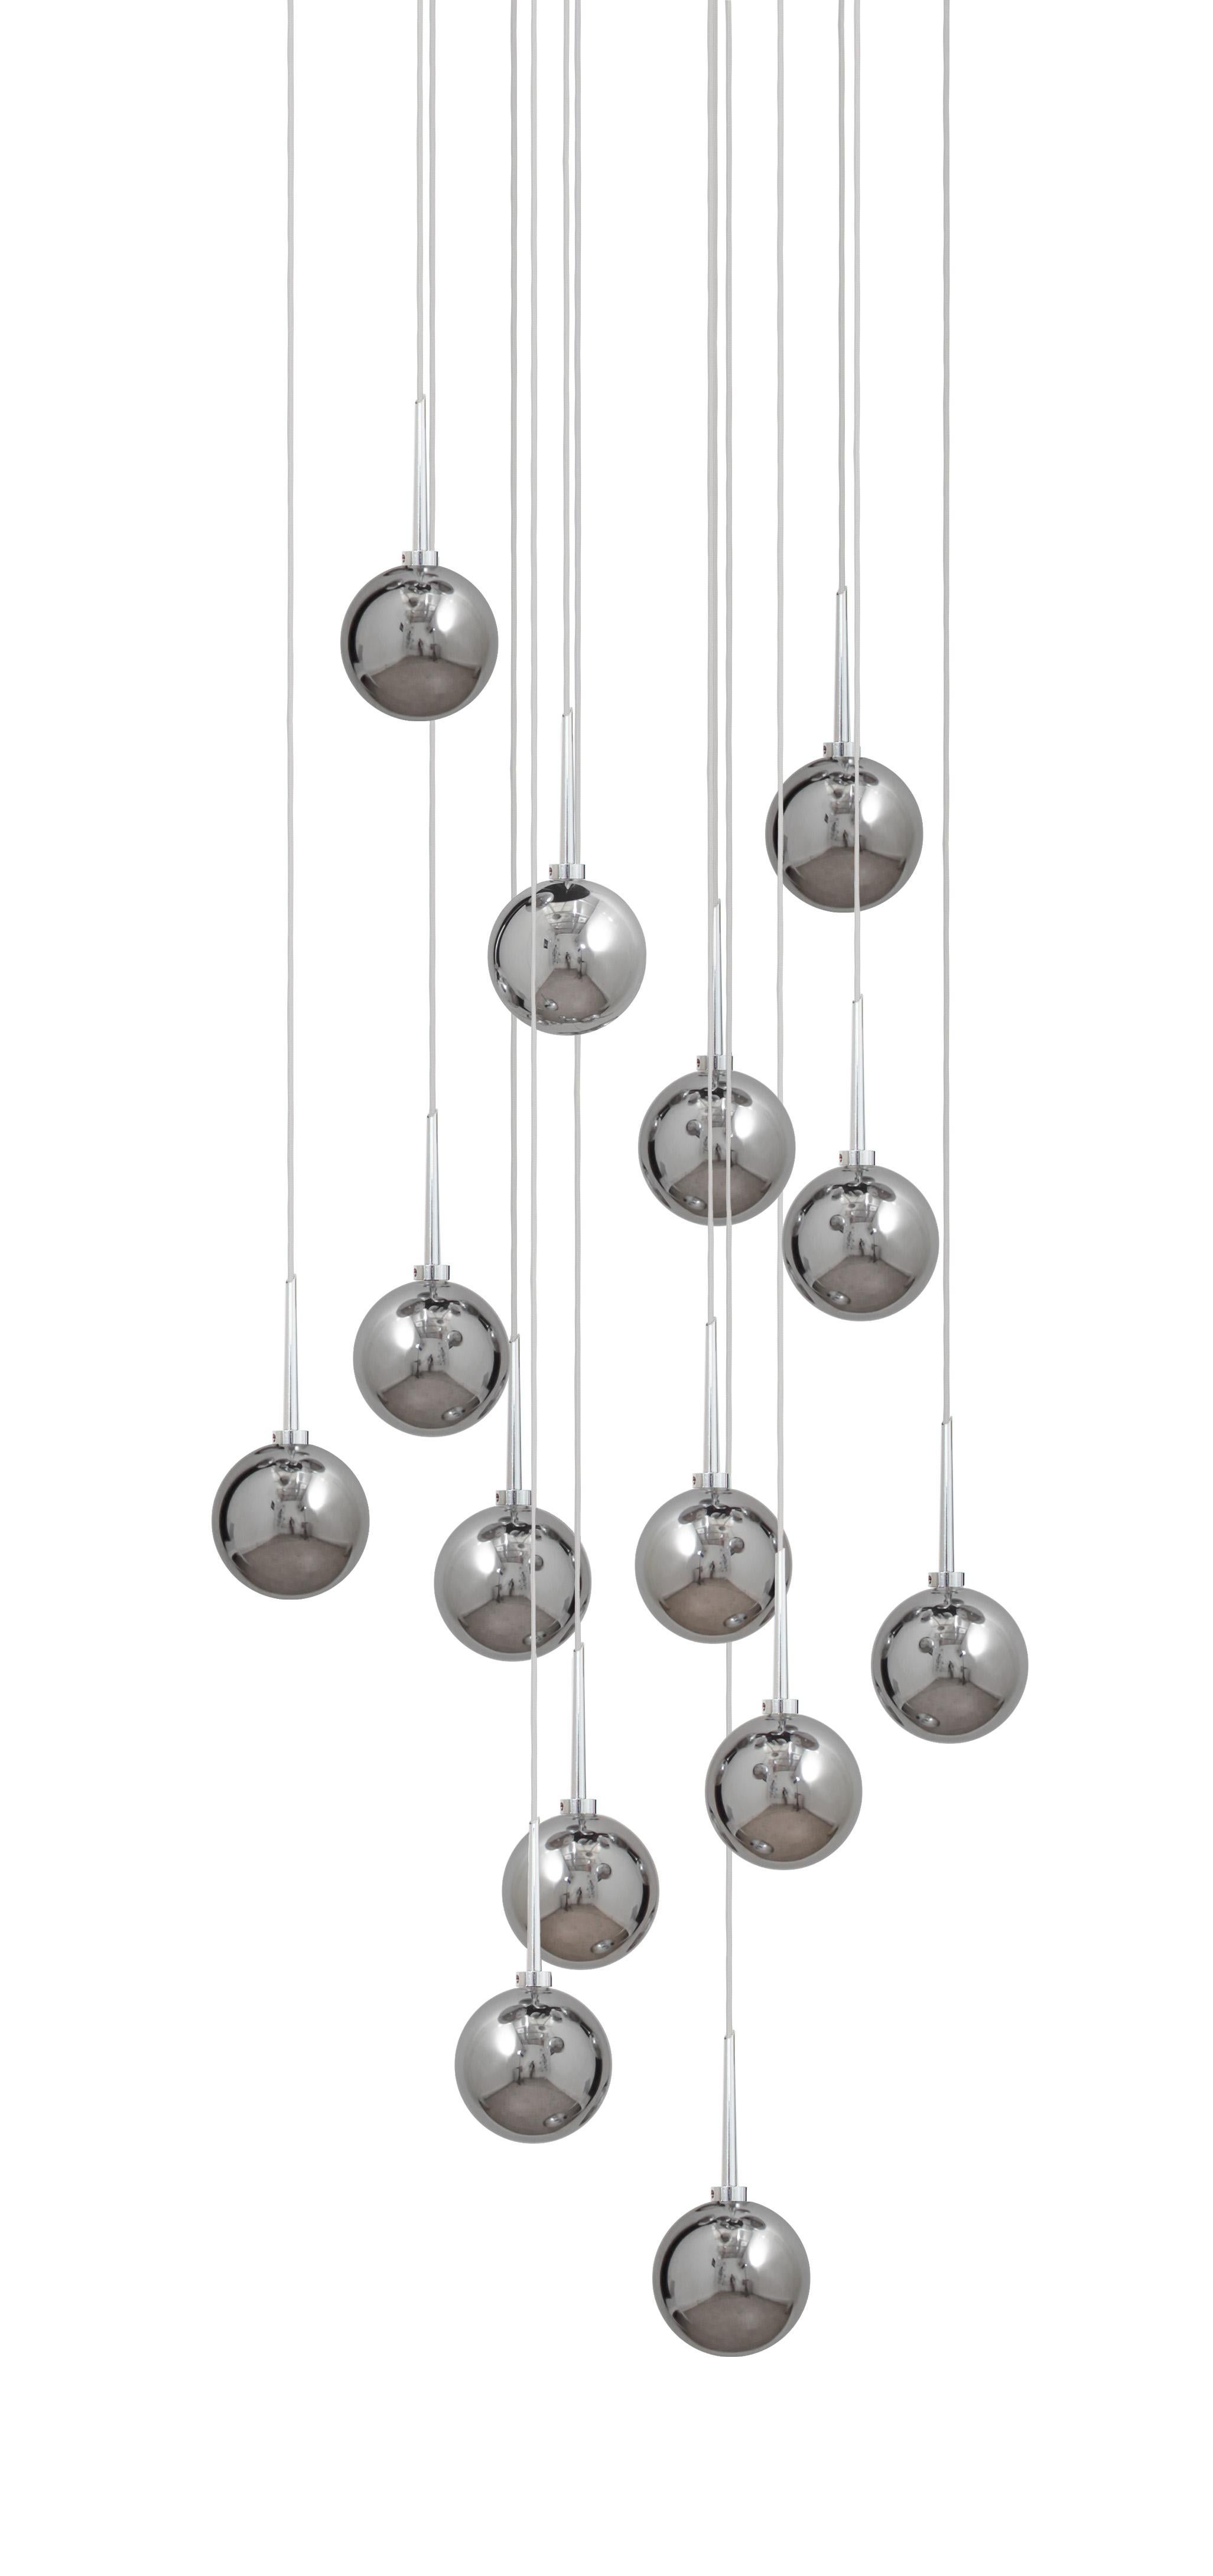 Hand blown glass pendant. 14 glass balls on 42 cm round canopy.

The Sweety pendant light illuminates your space in a soft and warm way. 
The smooth and shiny balls have a diameter of 8 cm, with two finishes you can choose from: copper or